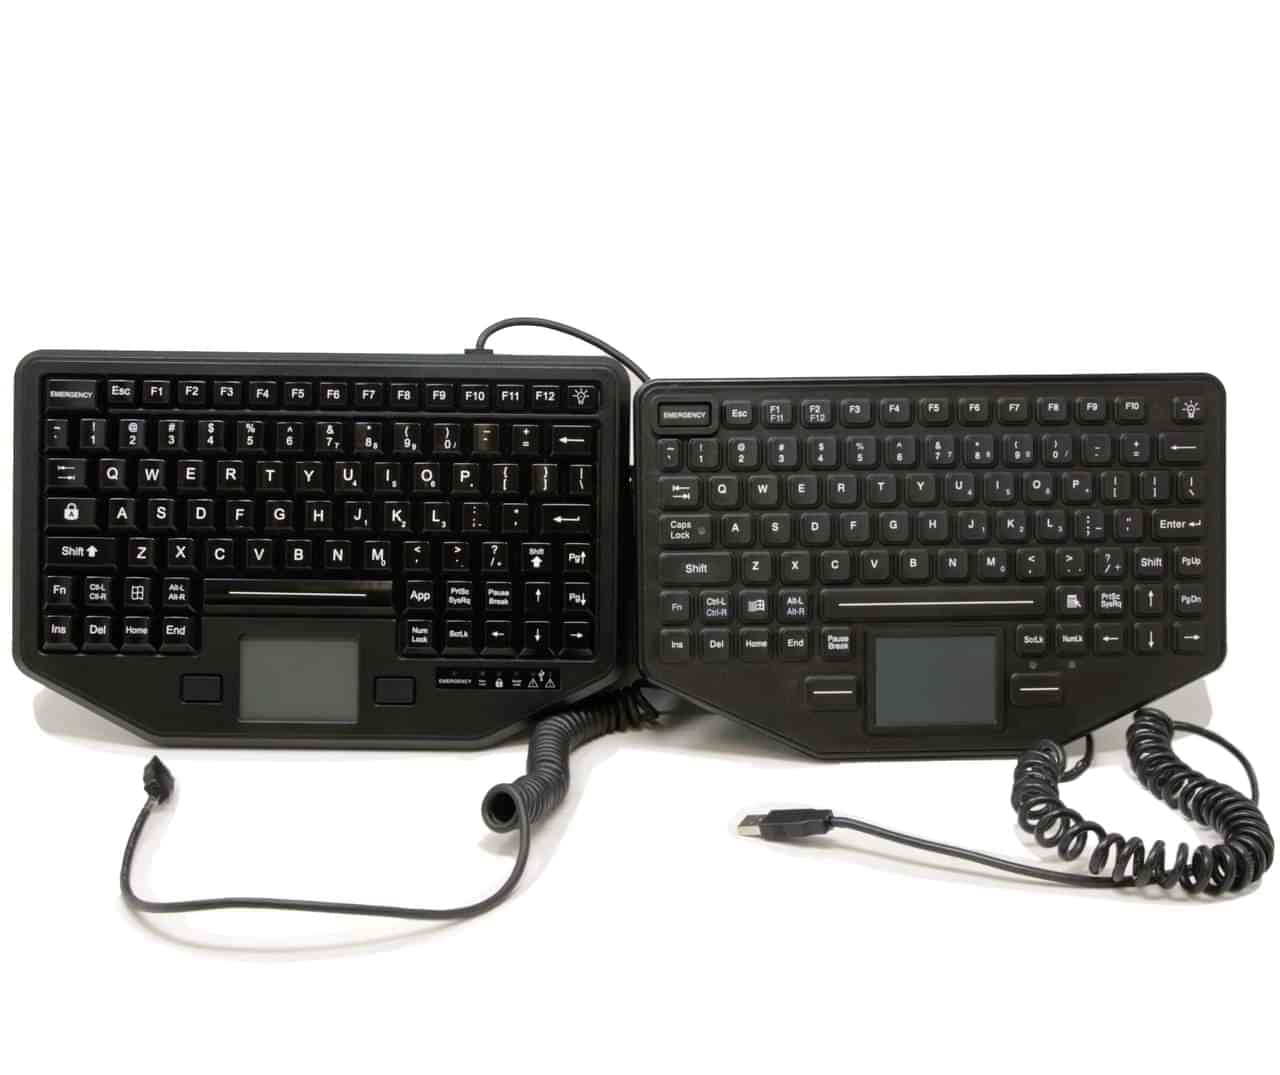 Two versions of the iKey keyboard, backlit and rubber